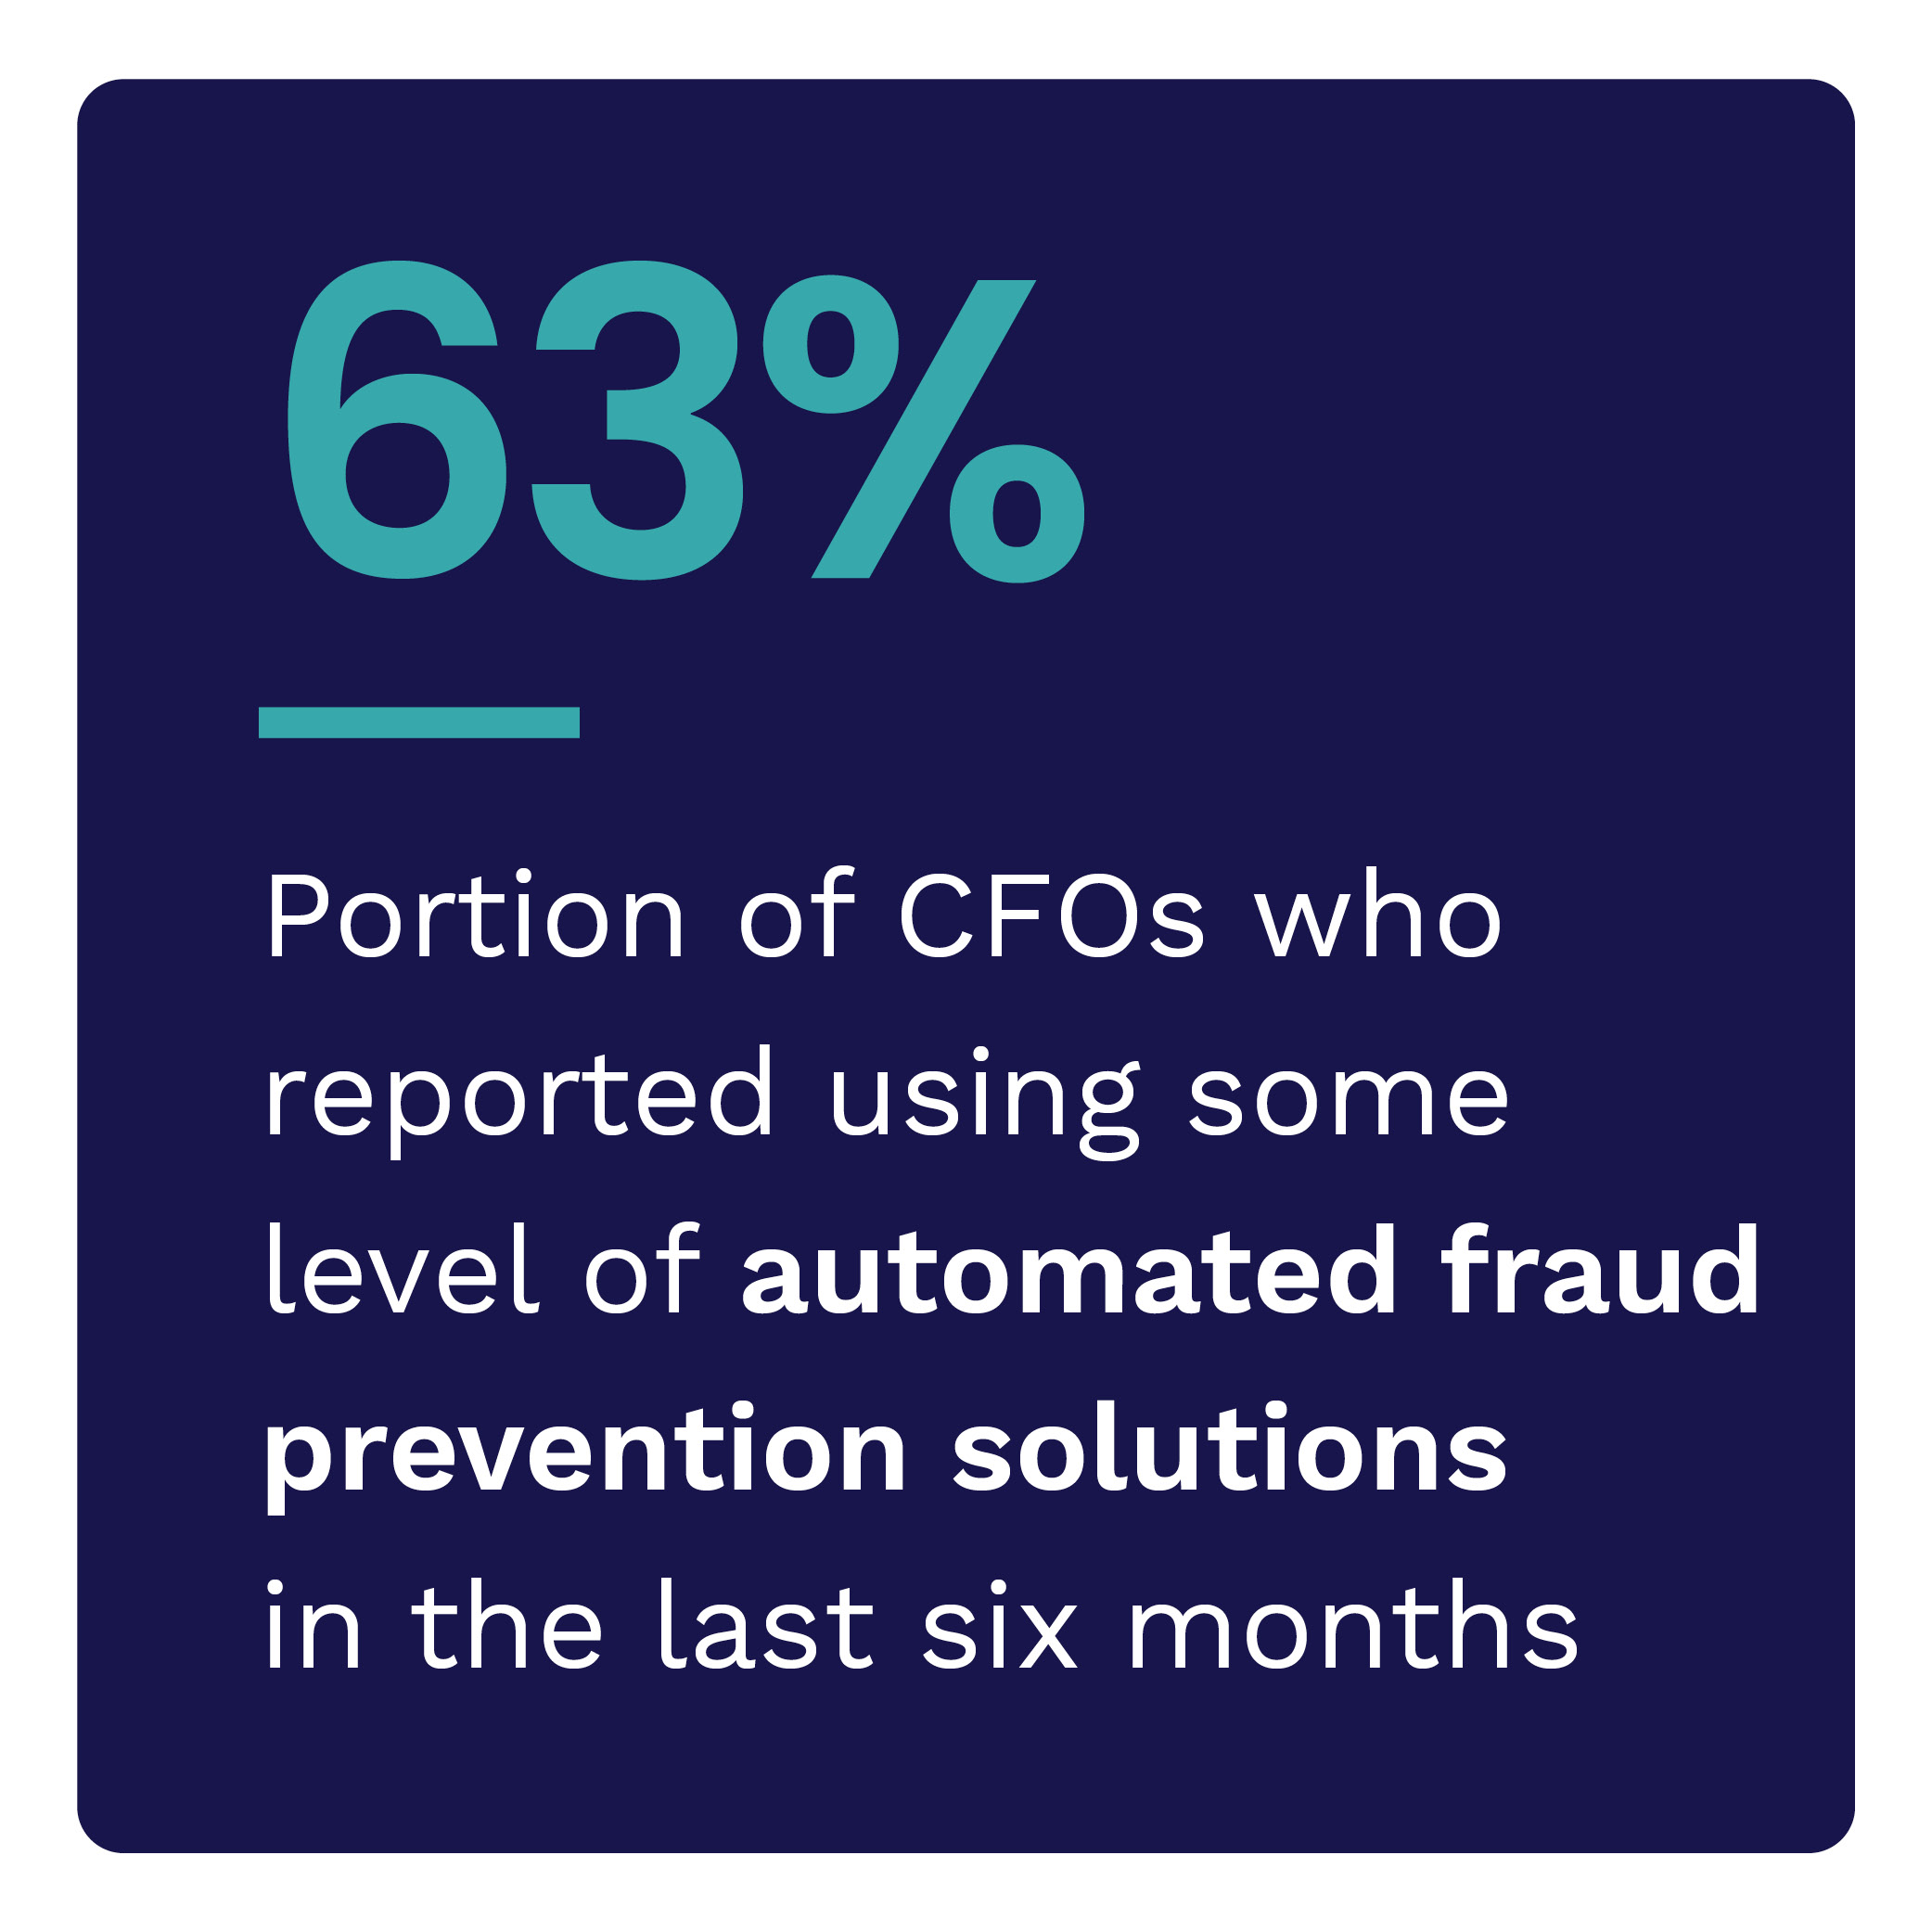 63%: Portion of CFOs who reported using some level of automated fraud prevention solutions in the last six months